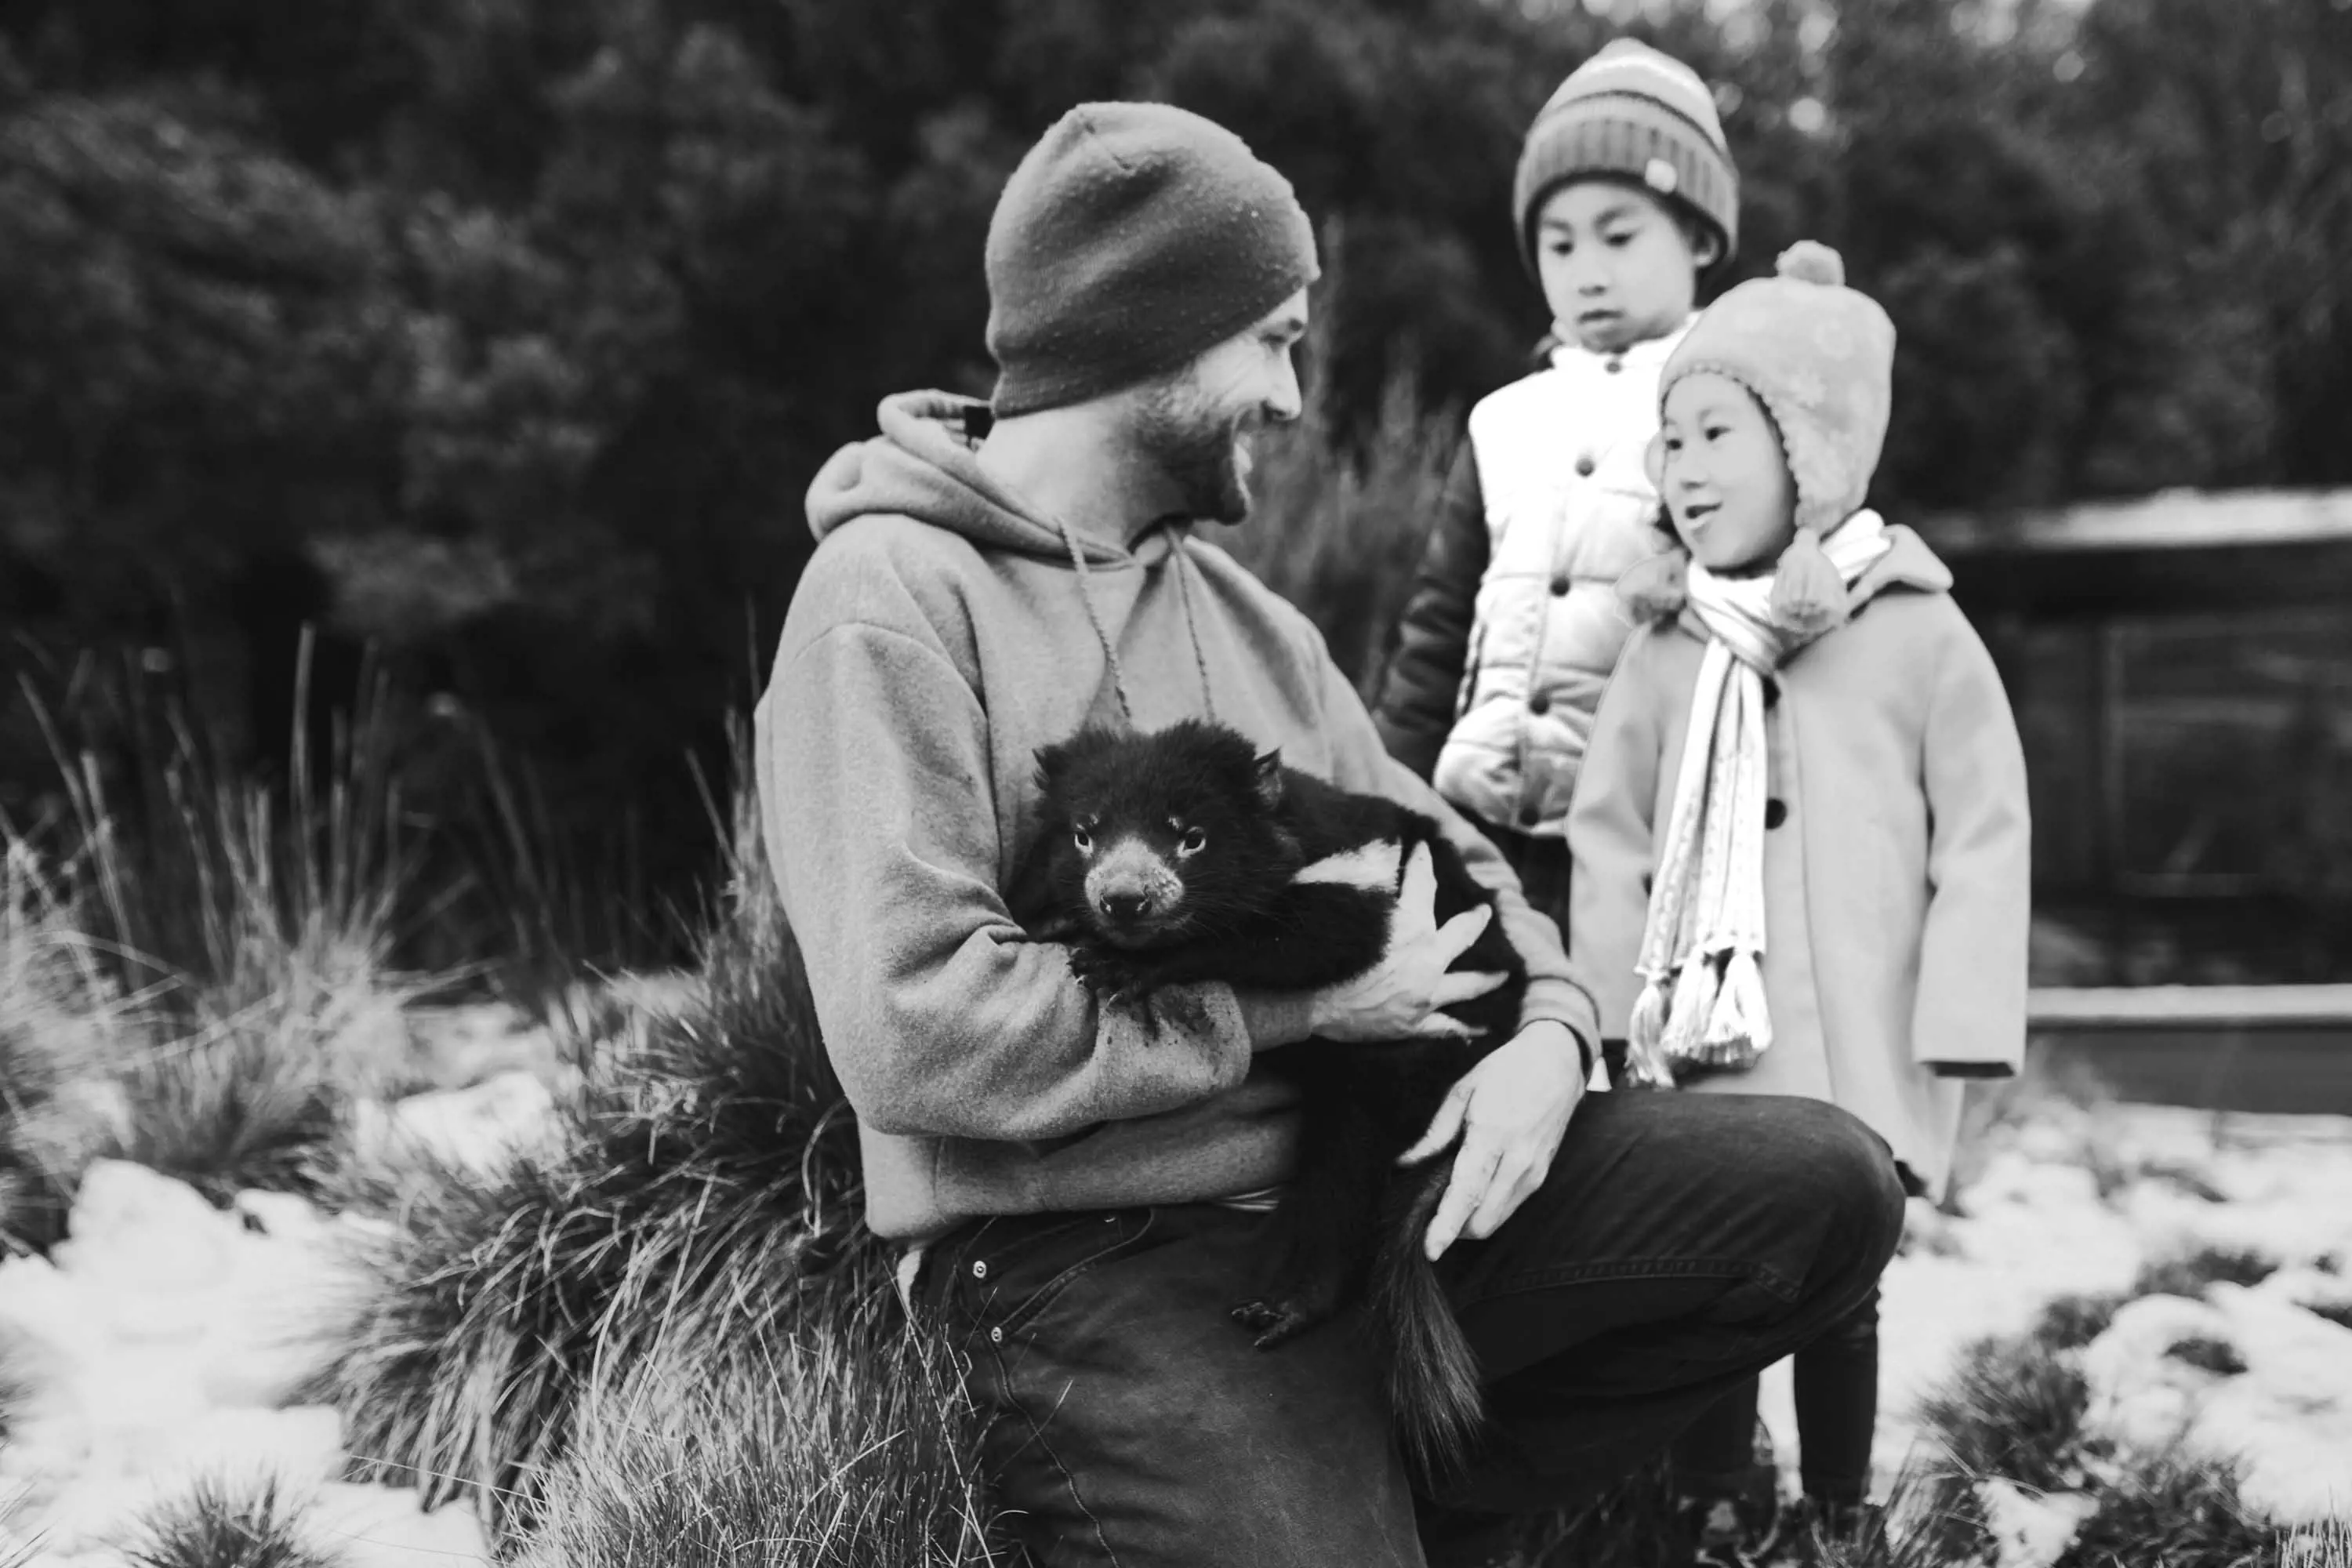 A park ranger holds a large Tasmanian Devil with thick black fur as two small children watch on.